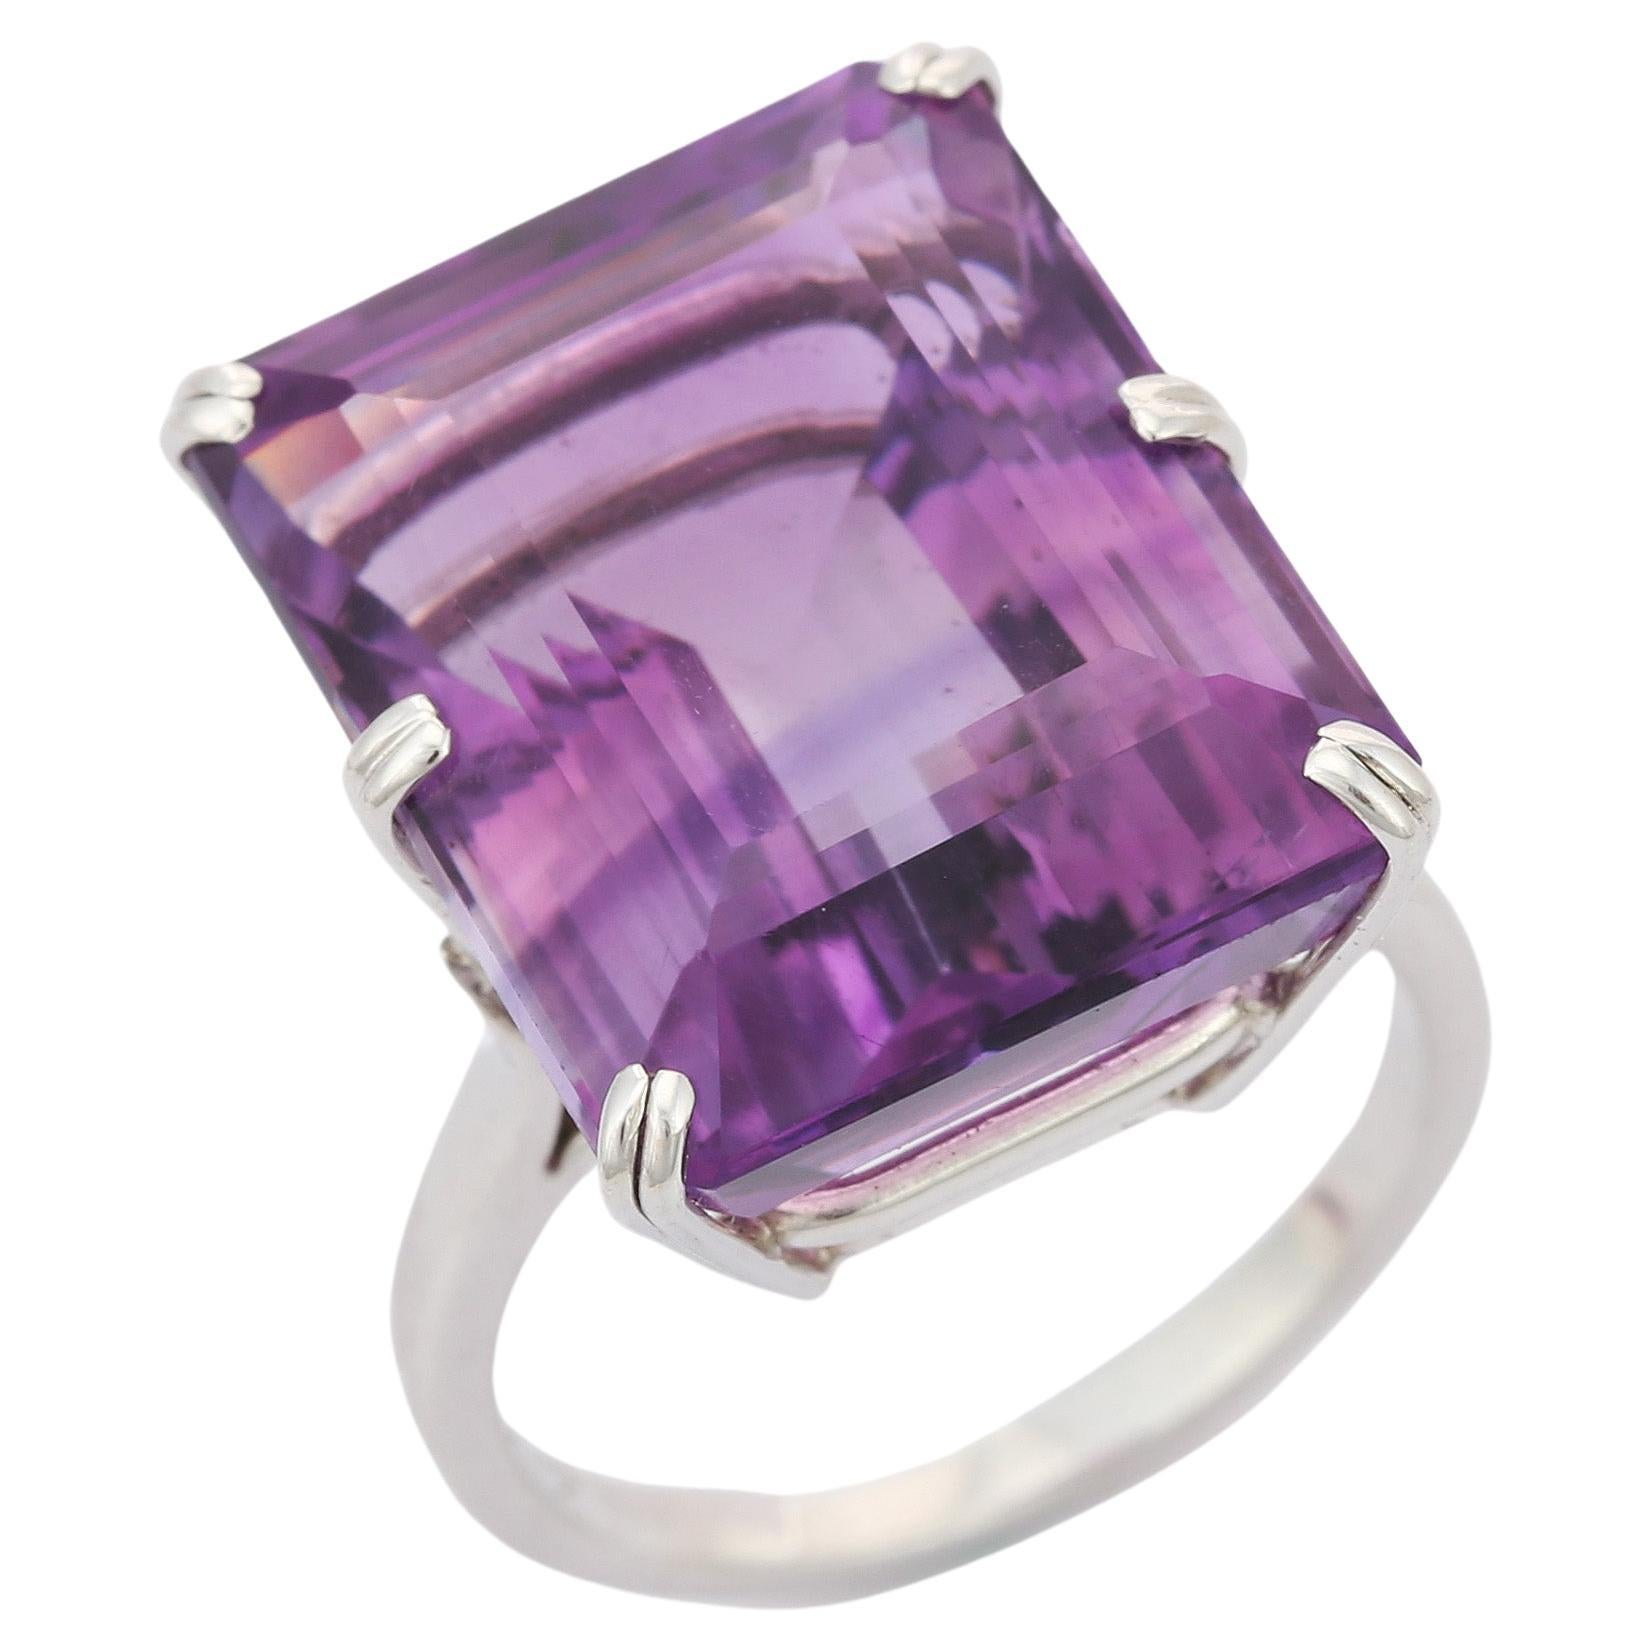 For Sale:  18K White Gold Art Deco Style 23.70 Ct. Octagon Amethyst Cocktail Ring